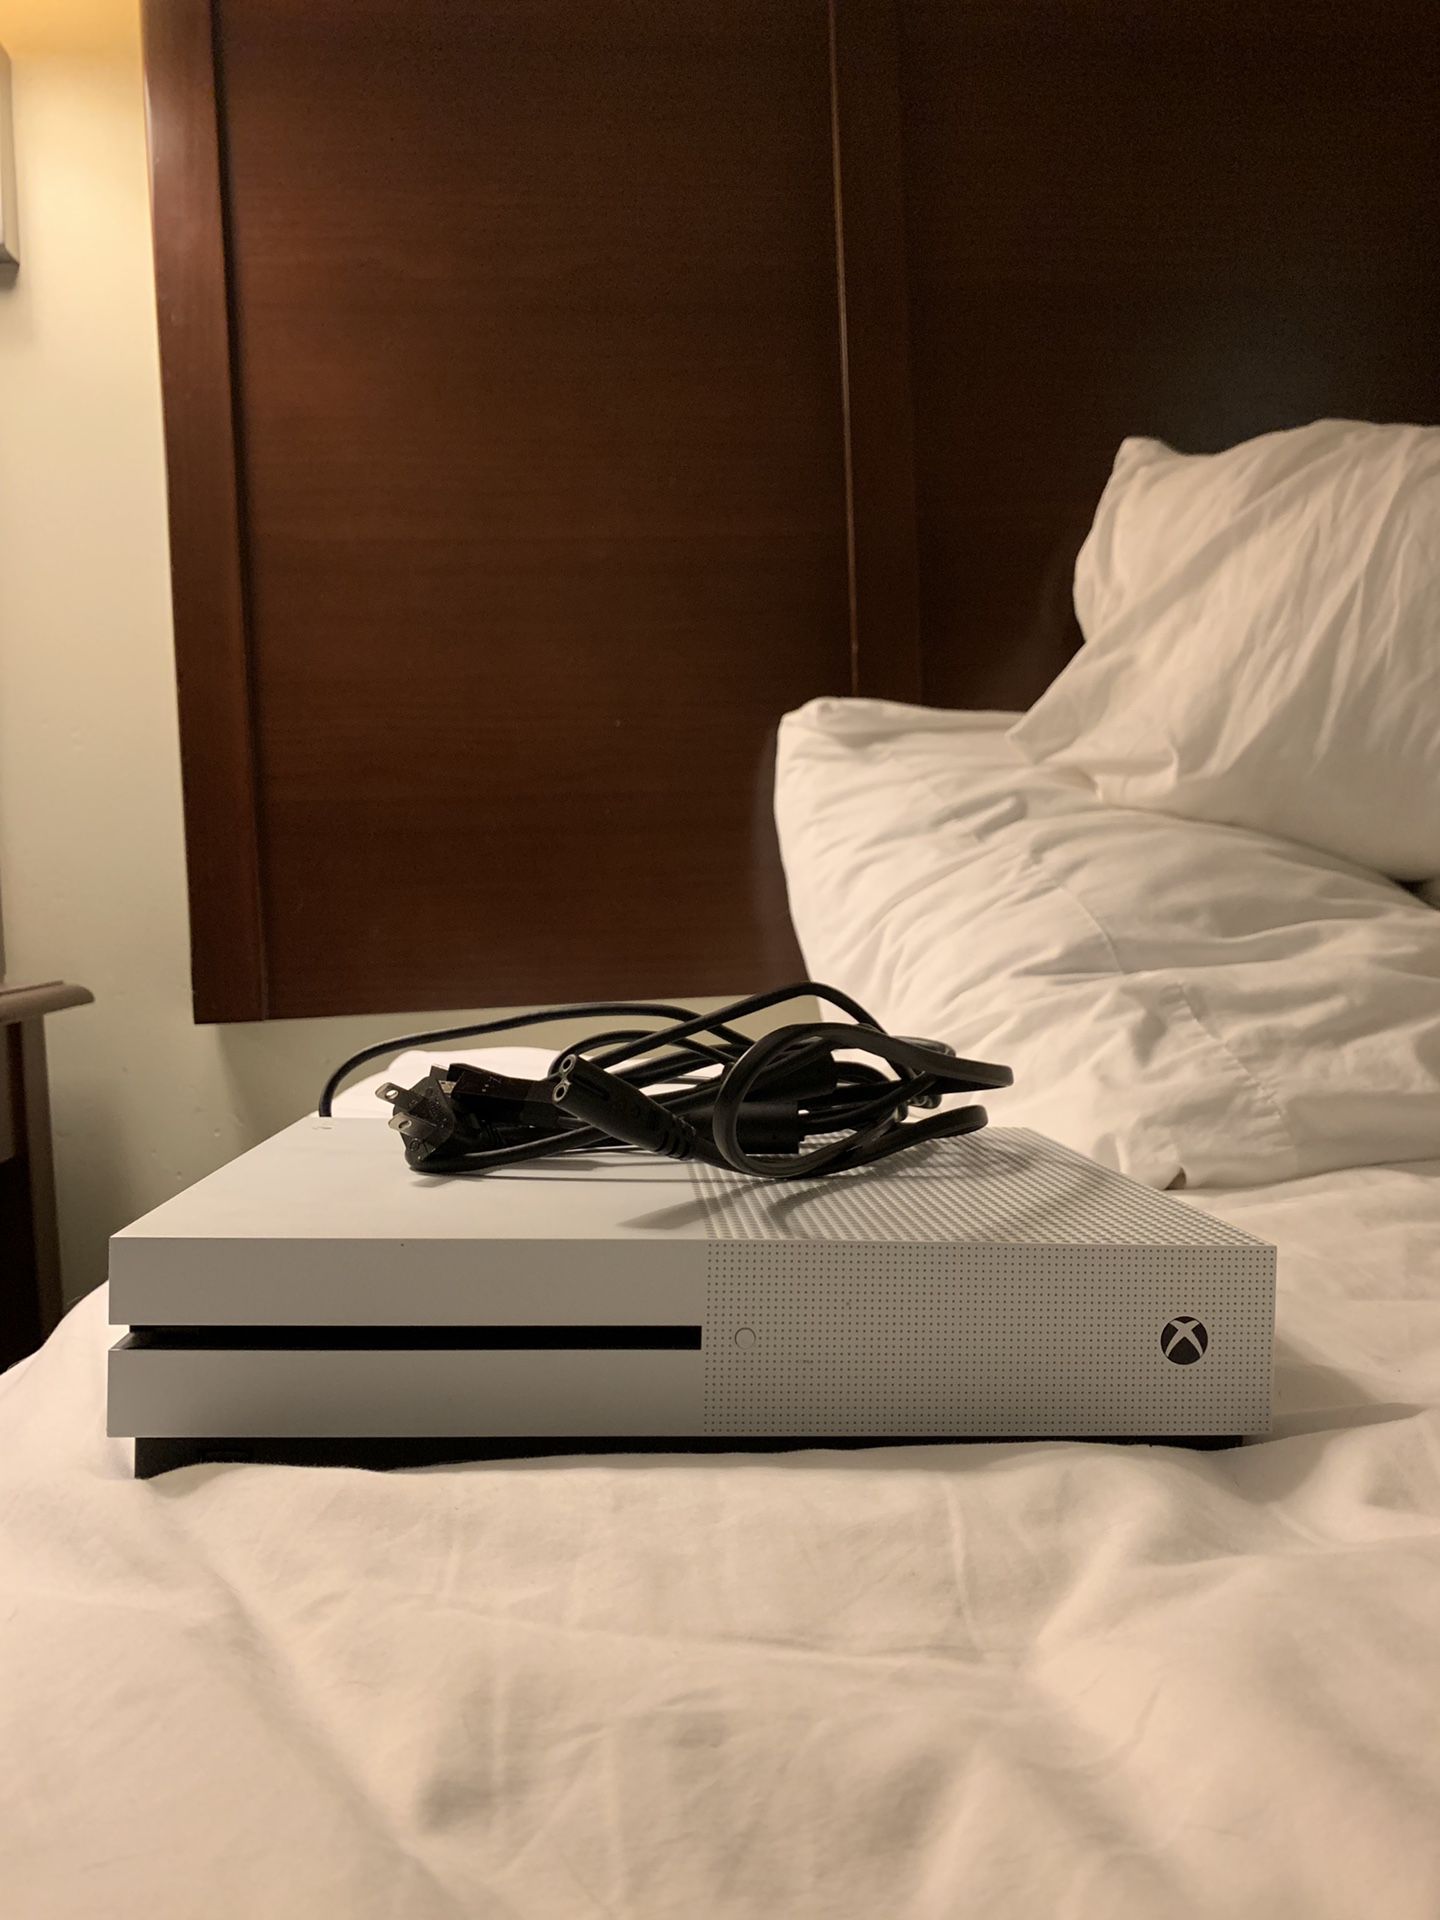 Xbox One S with no controller